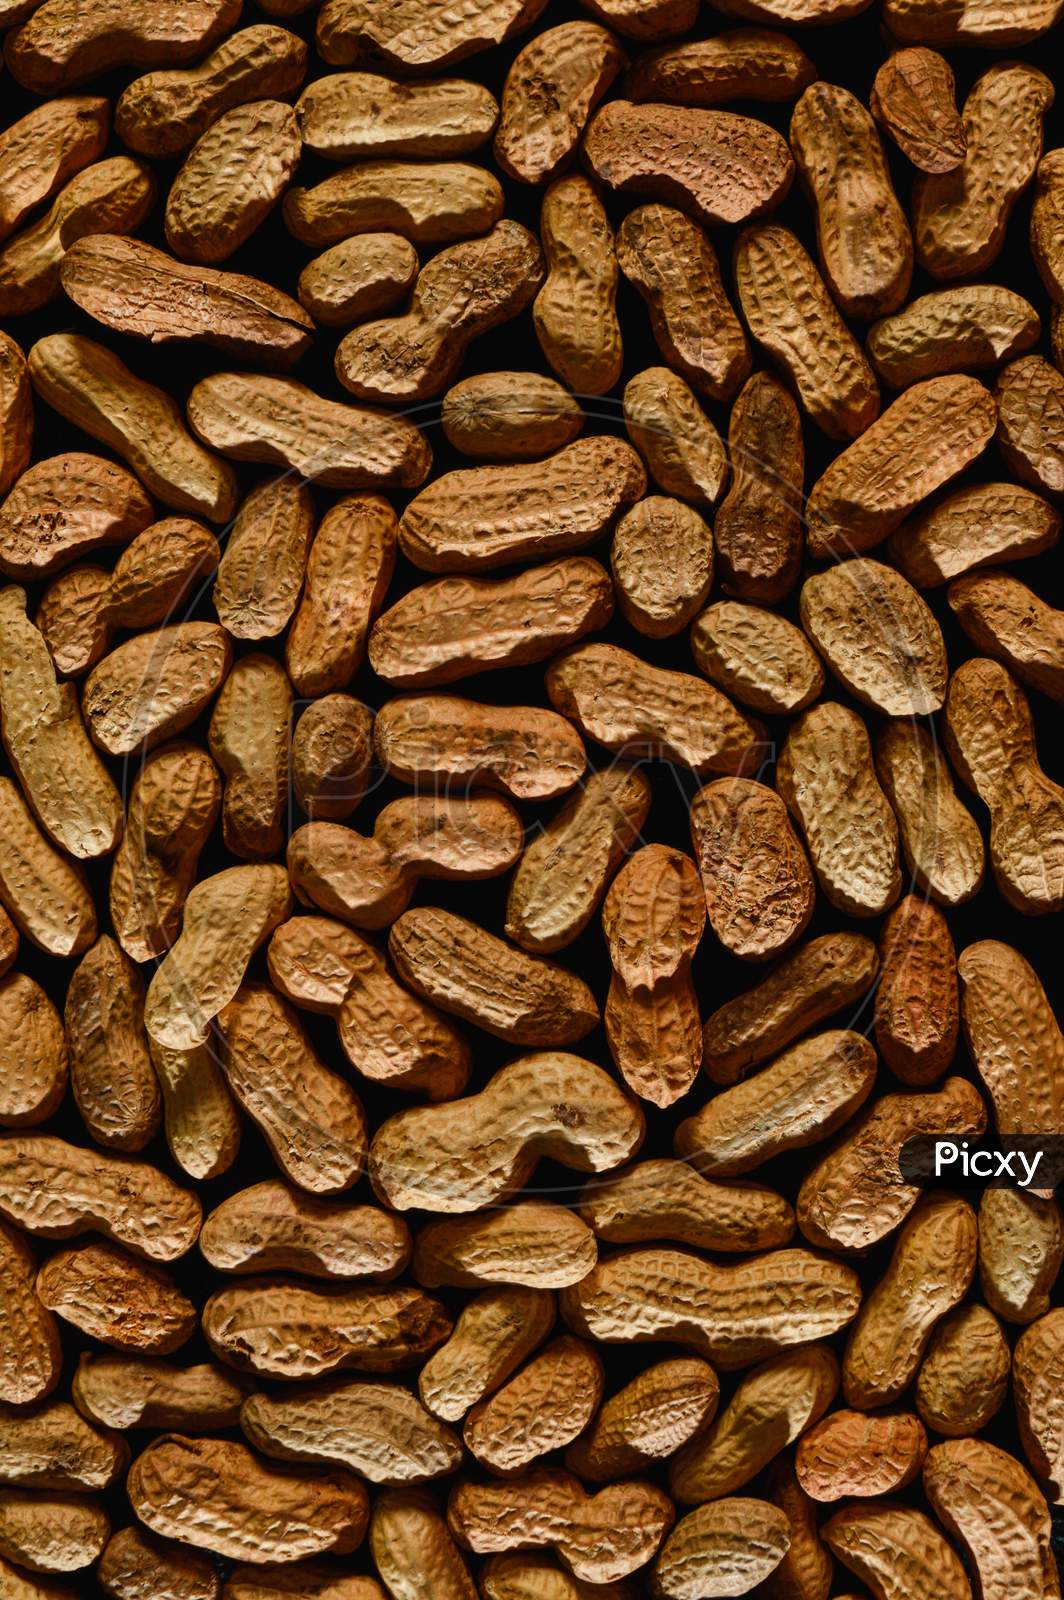 Peanut In A Shell Texture, Background Of Peanuts